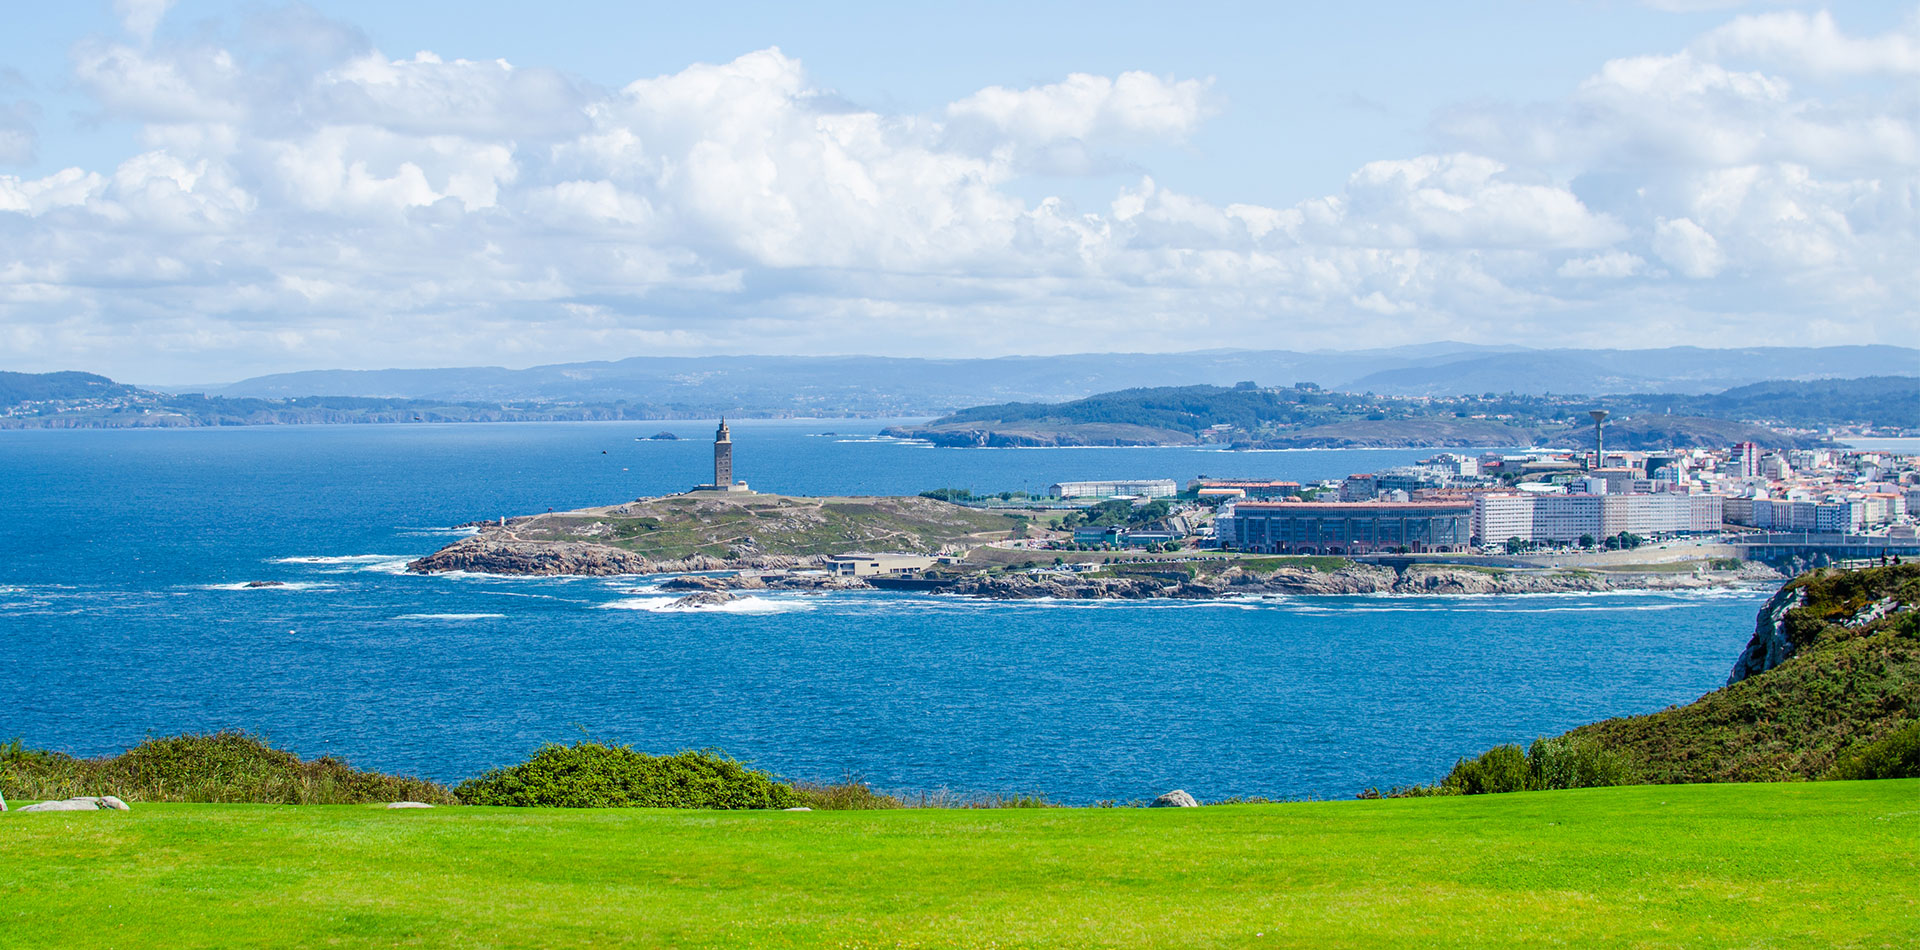 View of the lighthouse in La Coruna, Spain